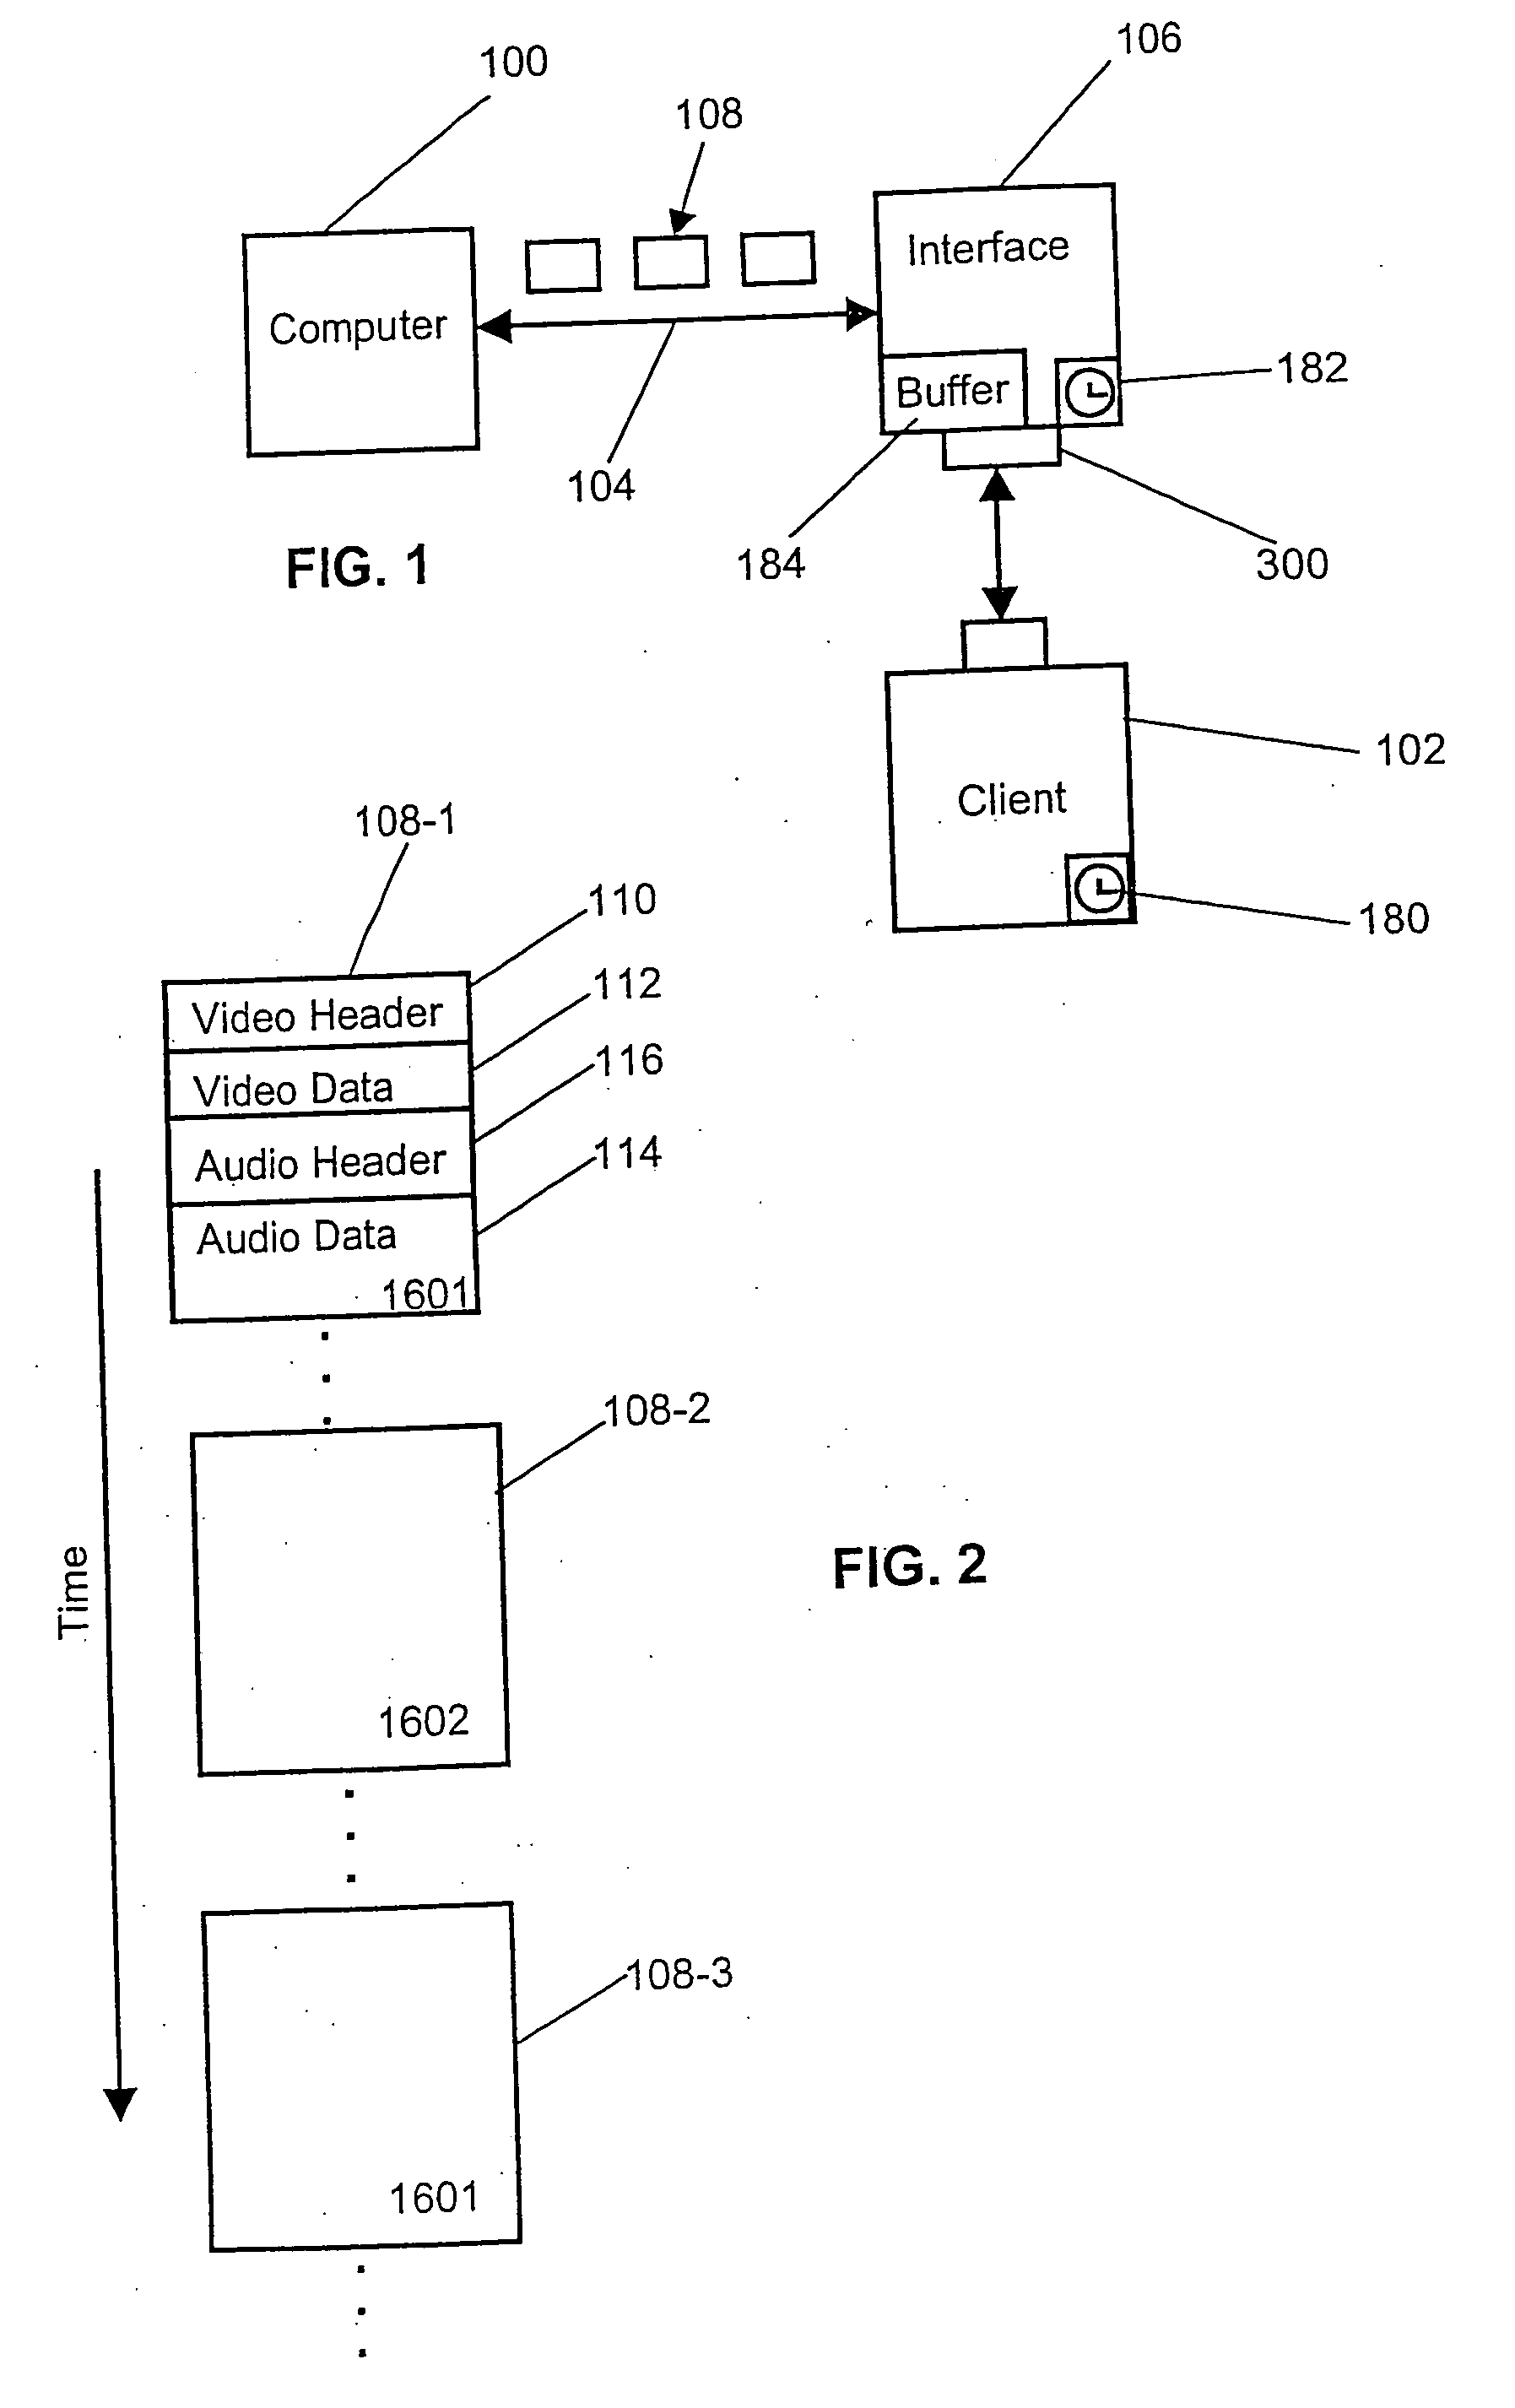 Synchronized transmission of audio and video data from a computer to a client via an interface